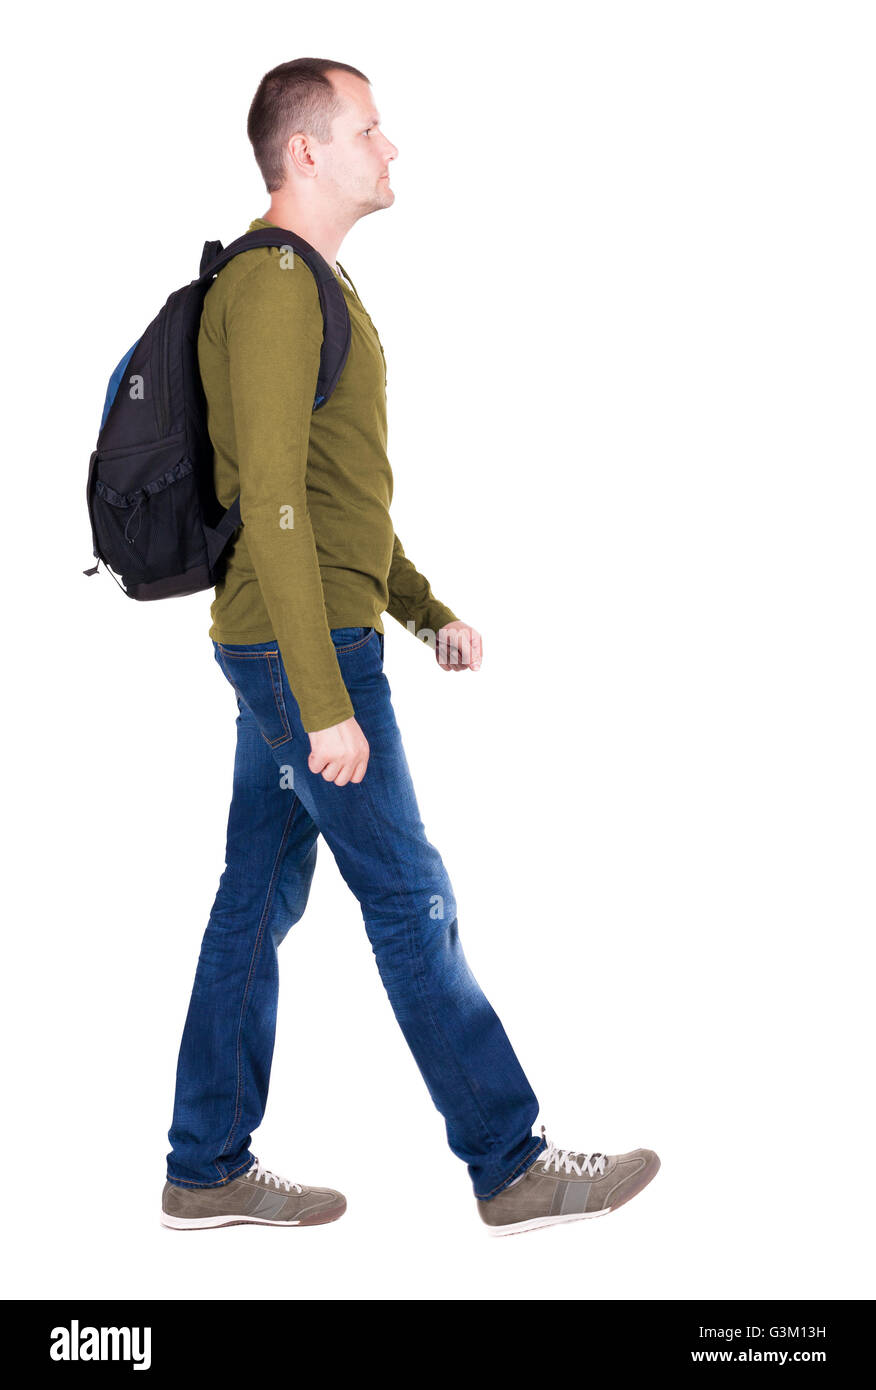 back view of walking man with backpack. brunette guy in motion. backside view of person. Rear view people collection. Isolated over white background. young man goes to side of a rolling travel bag on wheels Stock Photo